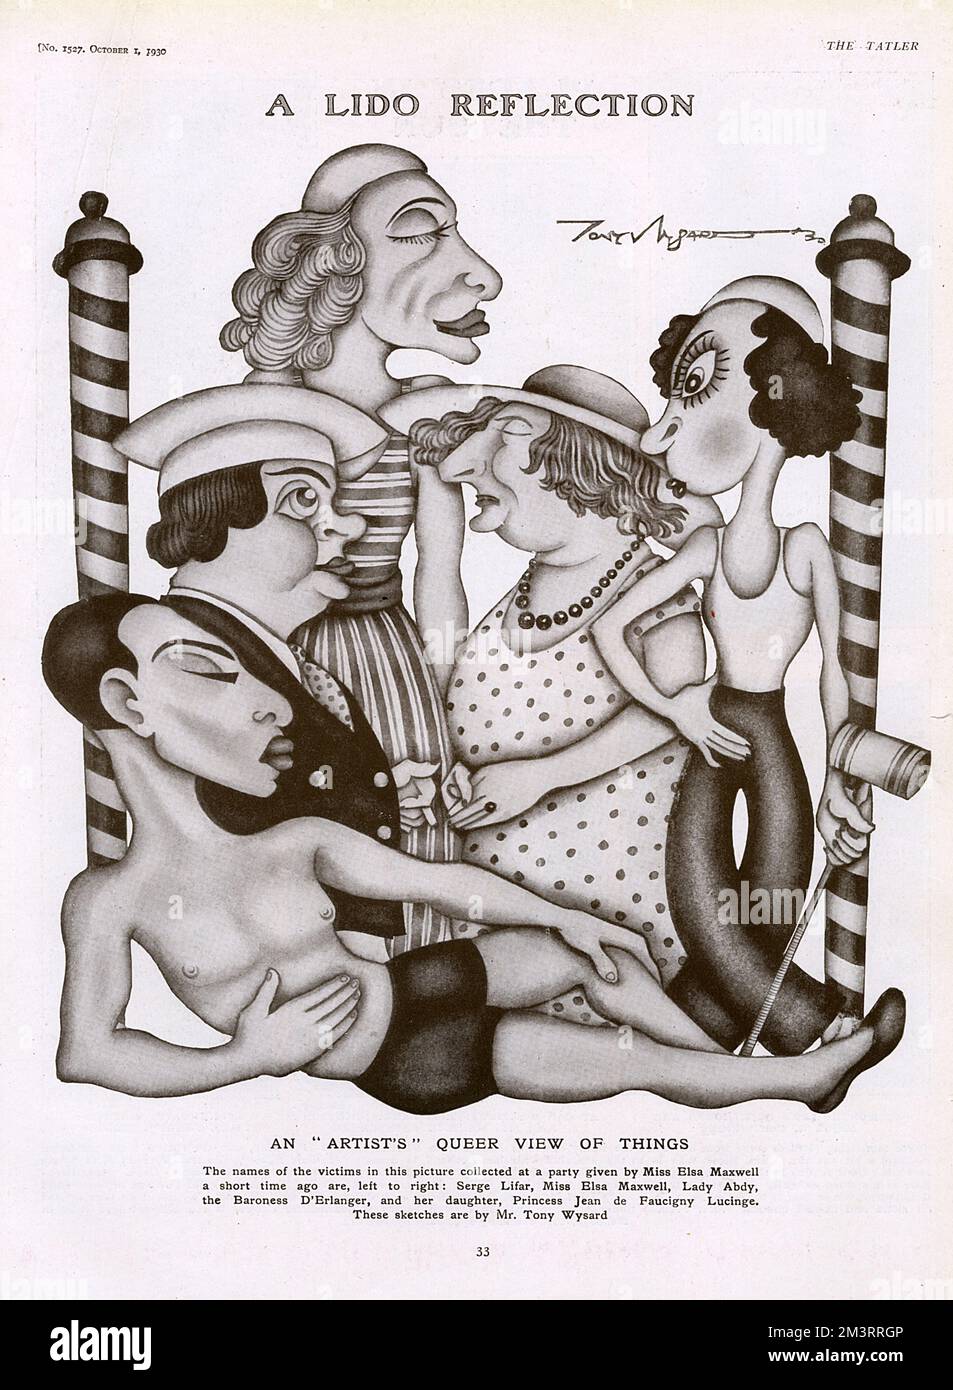 A gathering of society at the Venice Lido, at a party given by Elsa Maxwell.  Left to right are:  Serge Lifar, Miss Elsa Maxwell, Lady Abdy, the Baroness d'Erlanger and her daughter, Princess Jean de Faucigny Lucinge.  Caricature by Tony Wysard.     Date: 1930 Stock Photo